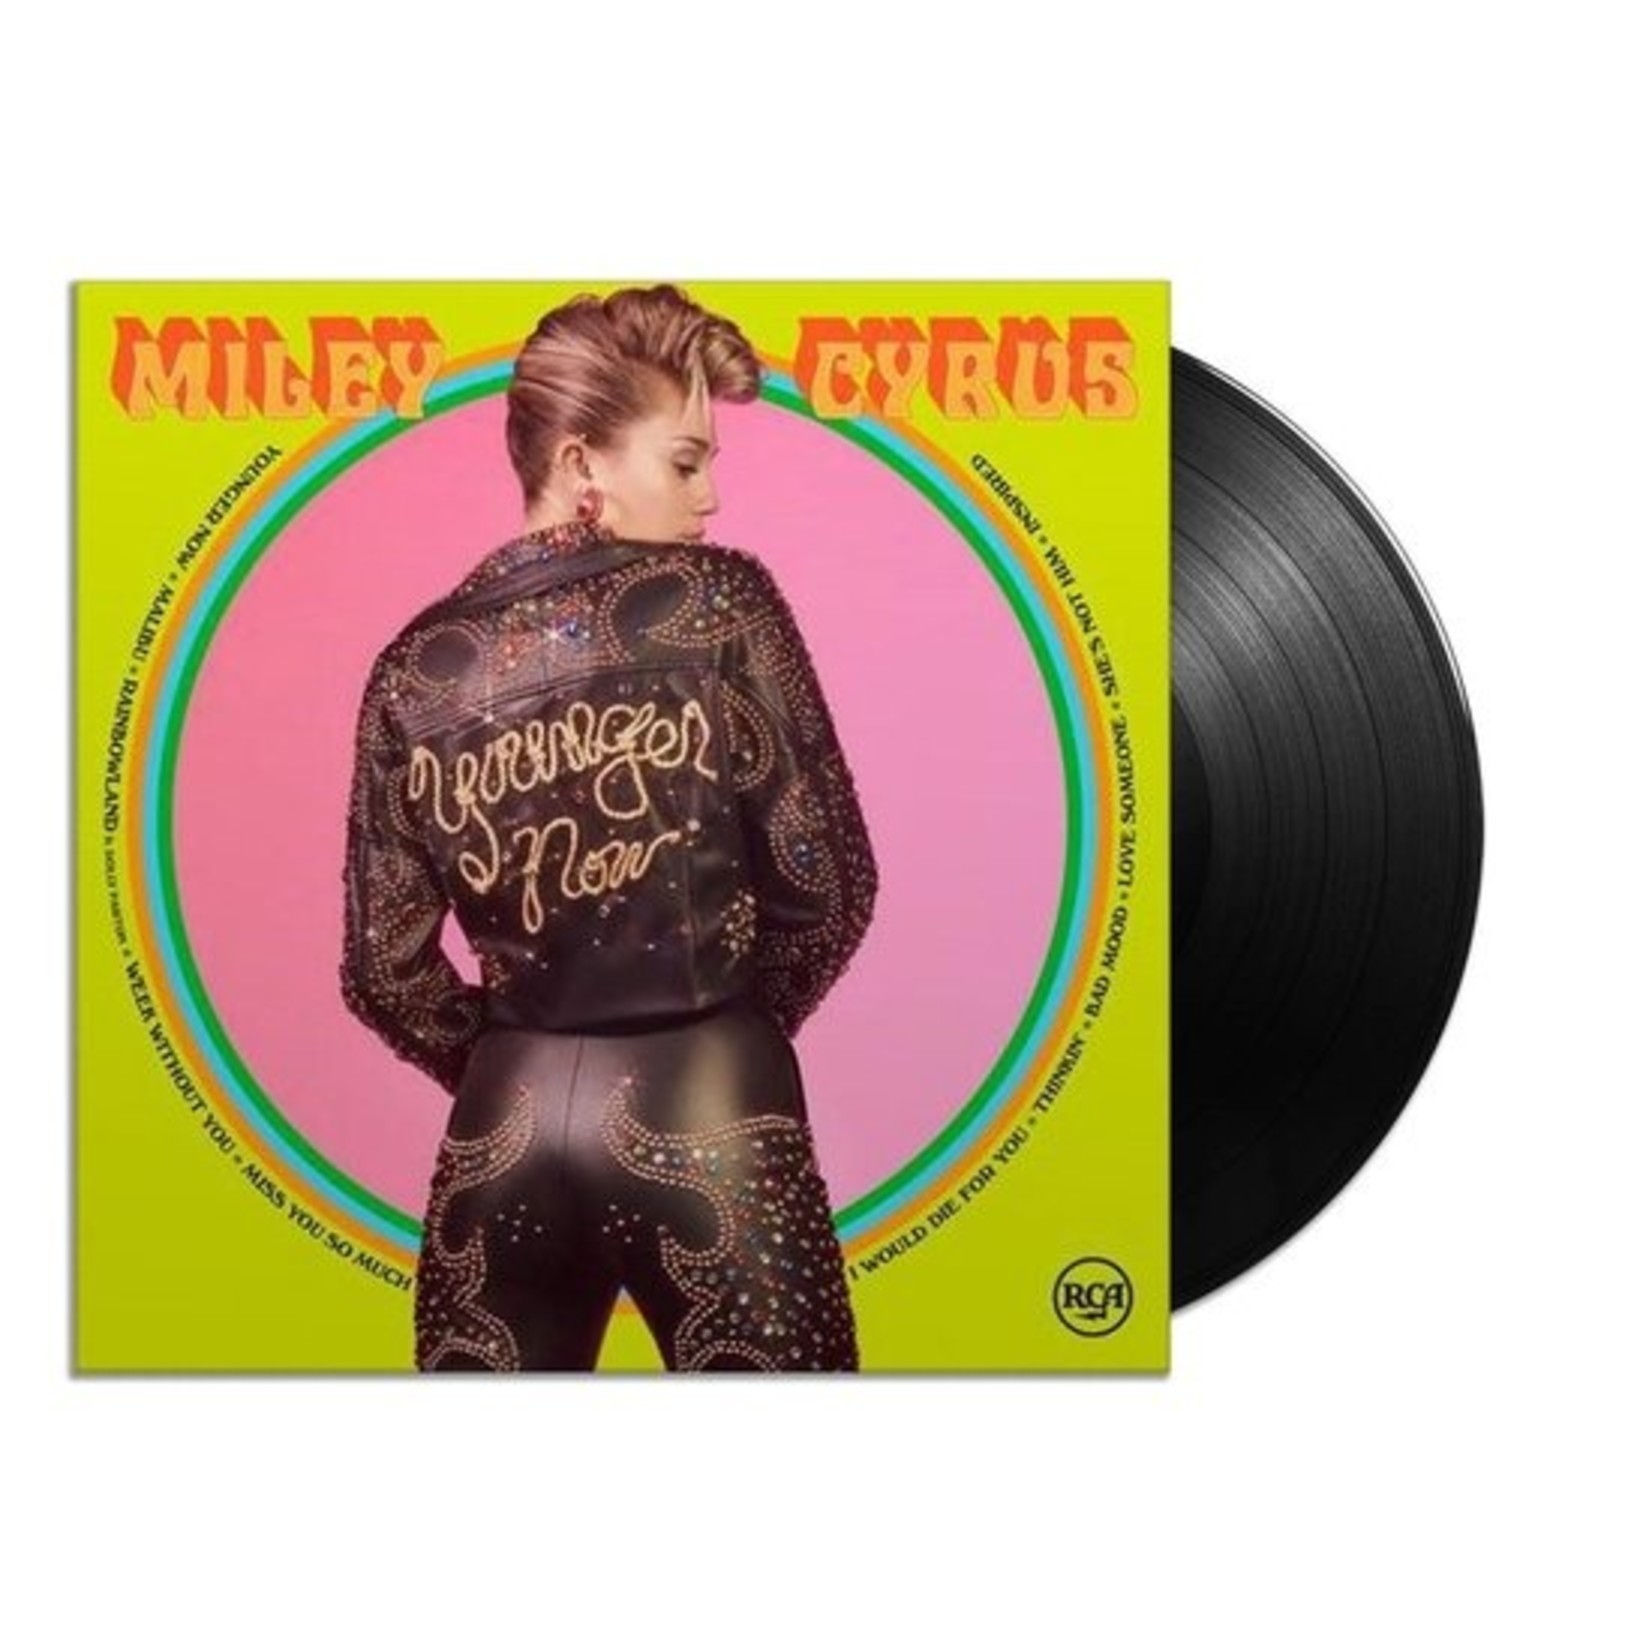 CYRUS, MILEY YOUNGER NOW  1-LP